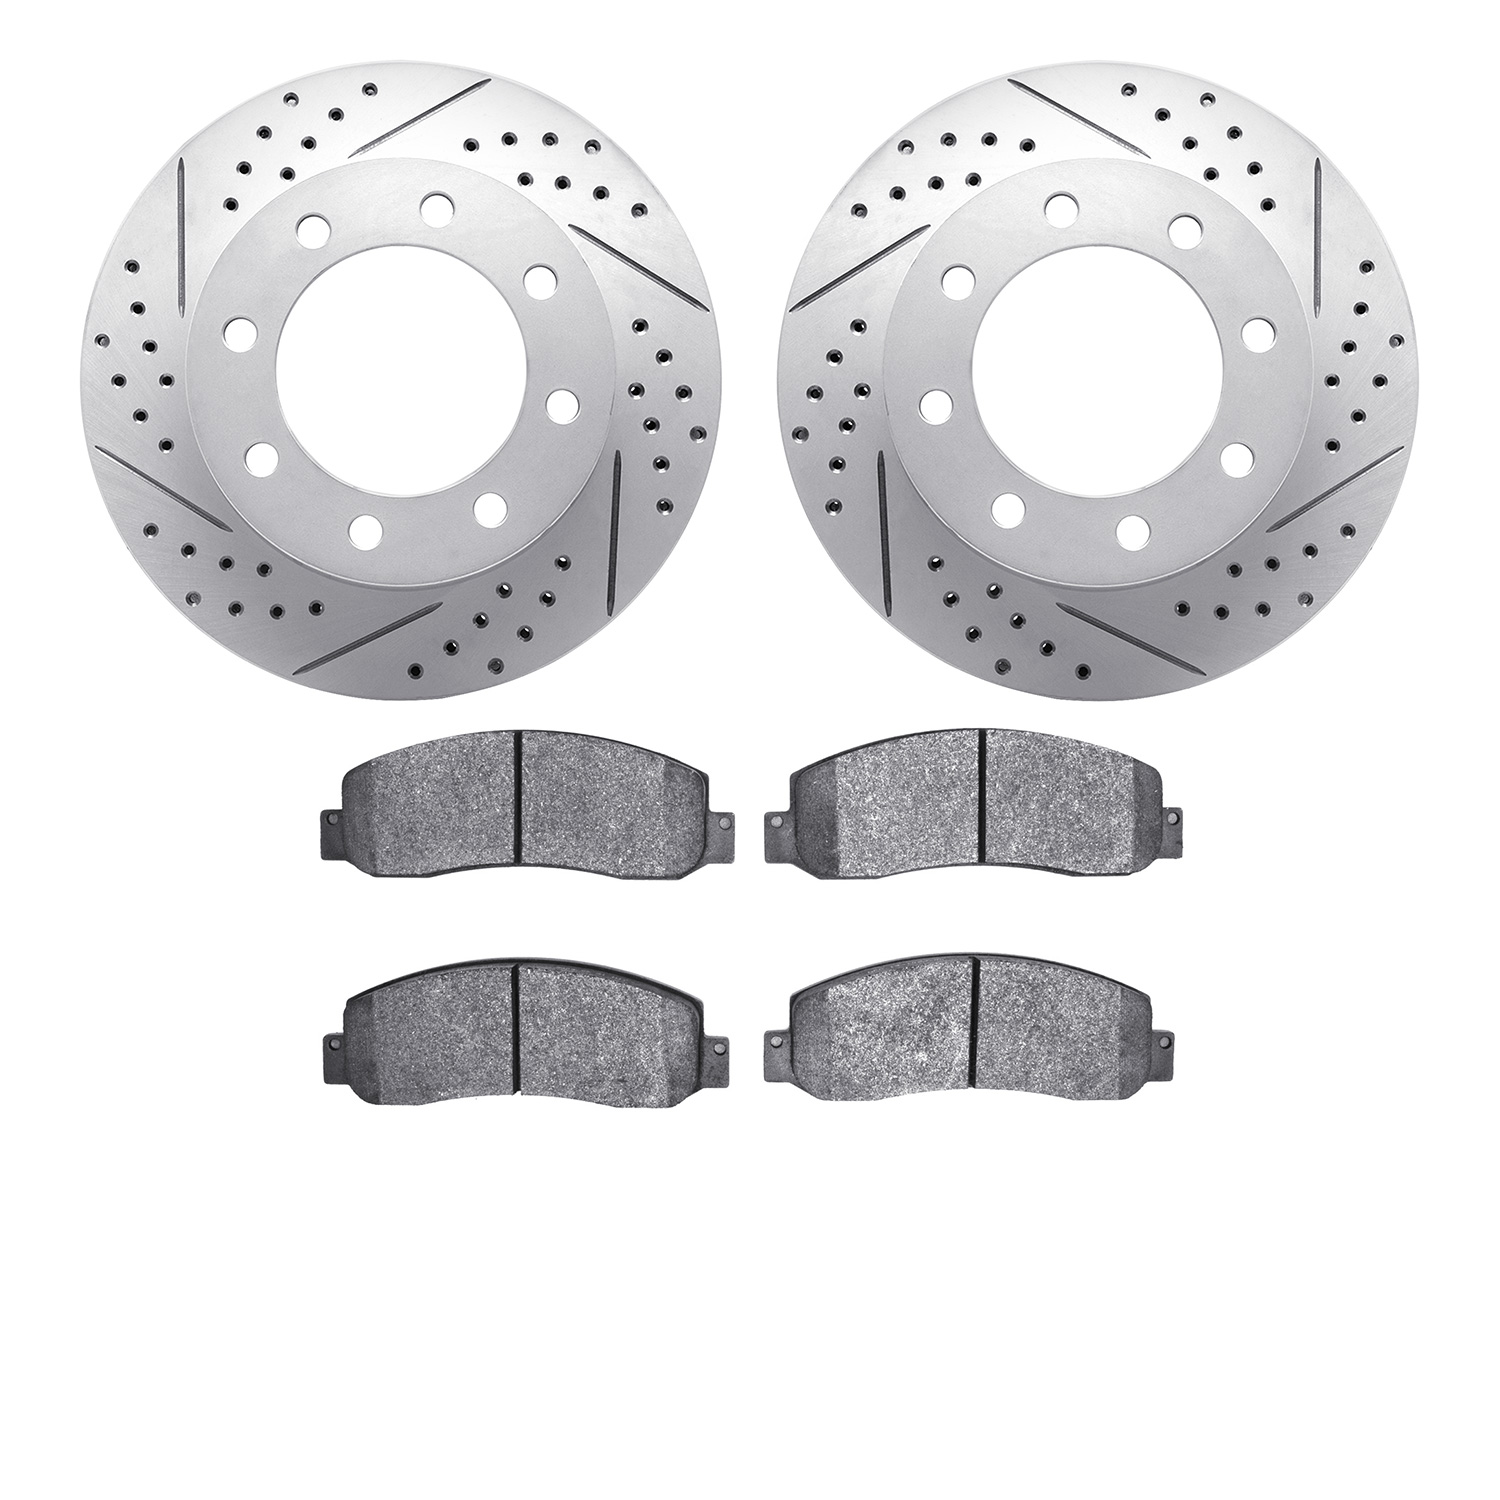 2402-54053 Geoperformance Drilled/Slotted Brake Rotors with Ultimate-Duty Brake Pads Kit, 2005-2011 Ford/Lincoln/Mercury/Mazda,